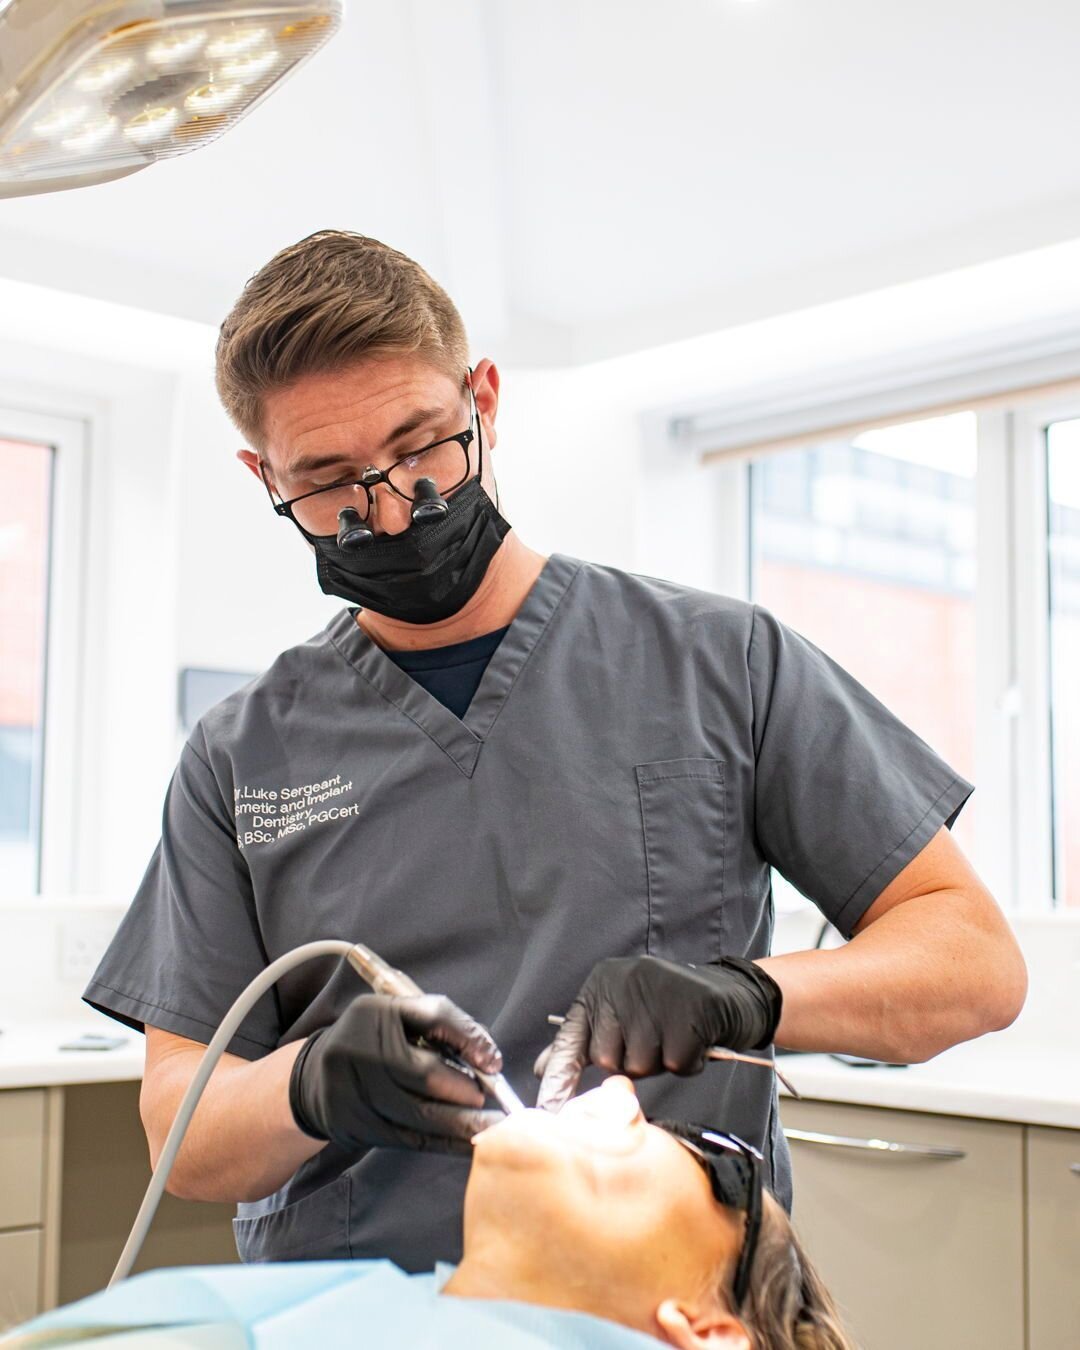 Ready to transform your smile? 🦷 Get in touch with us at Raby Road Dental today and take the first step on your new smile journey! 💫 

#SmileWithConfidence #RabyRoadDental